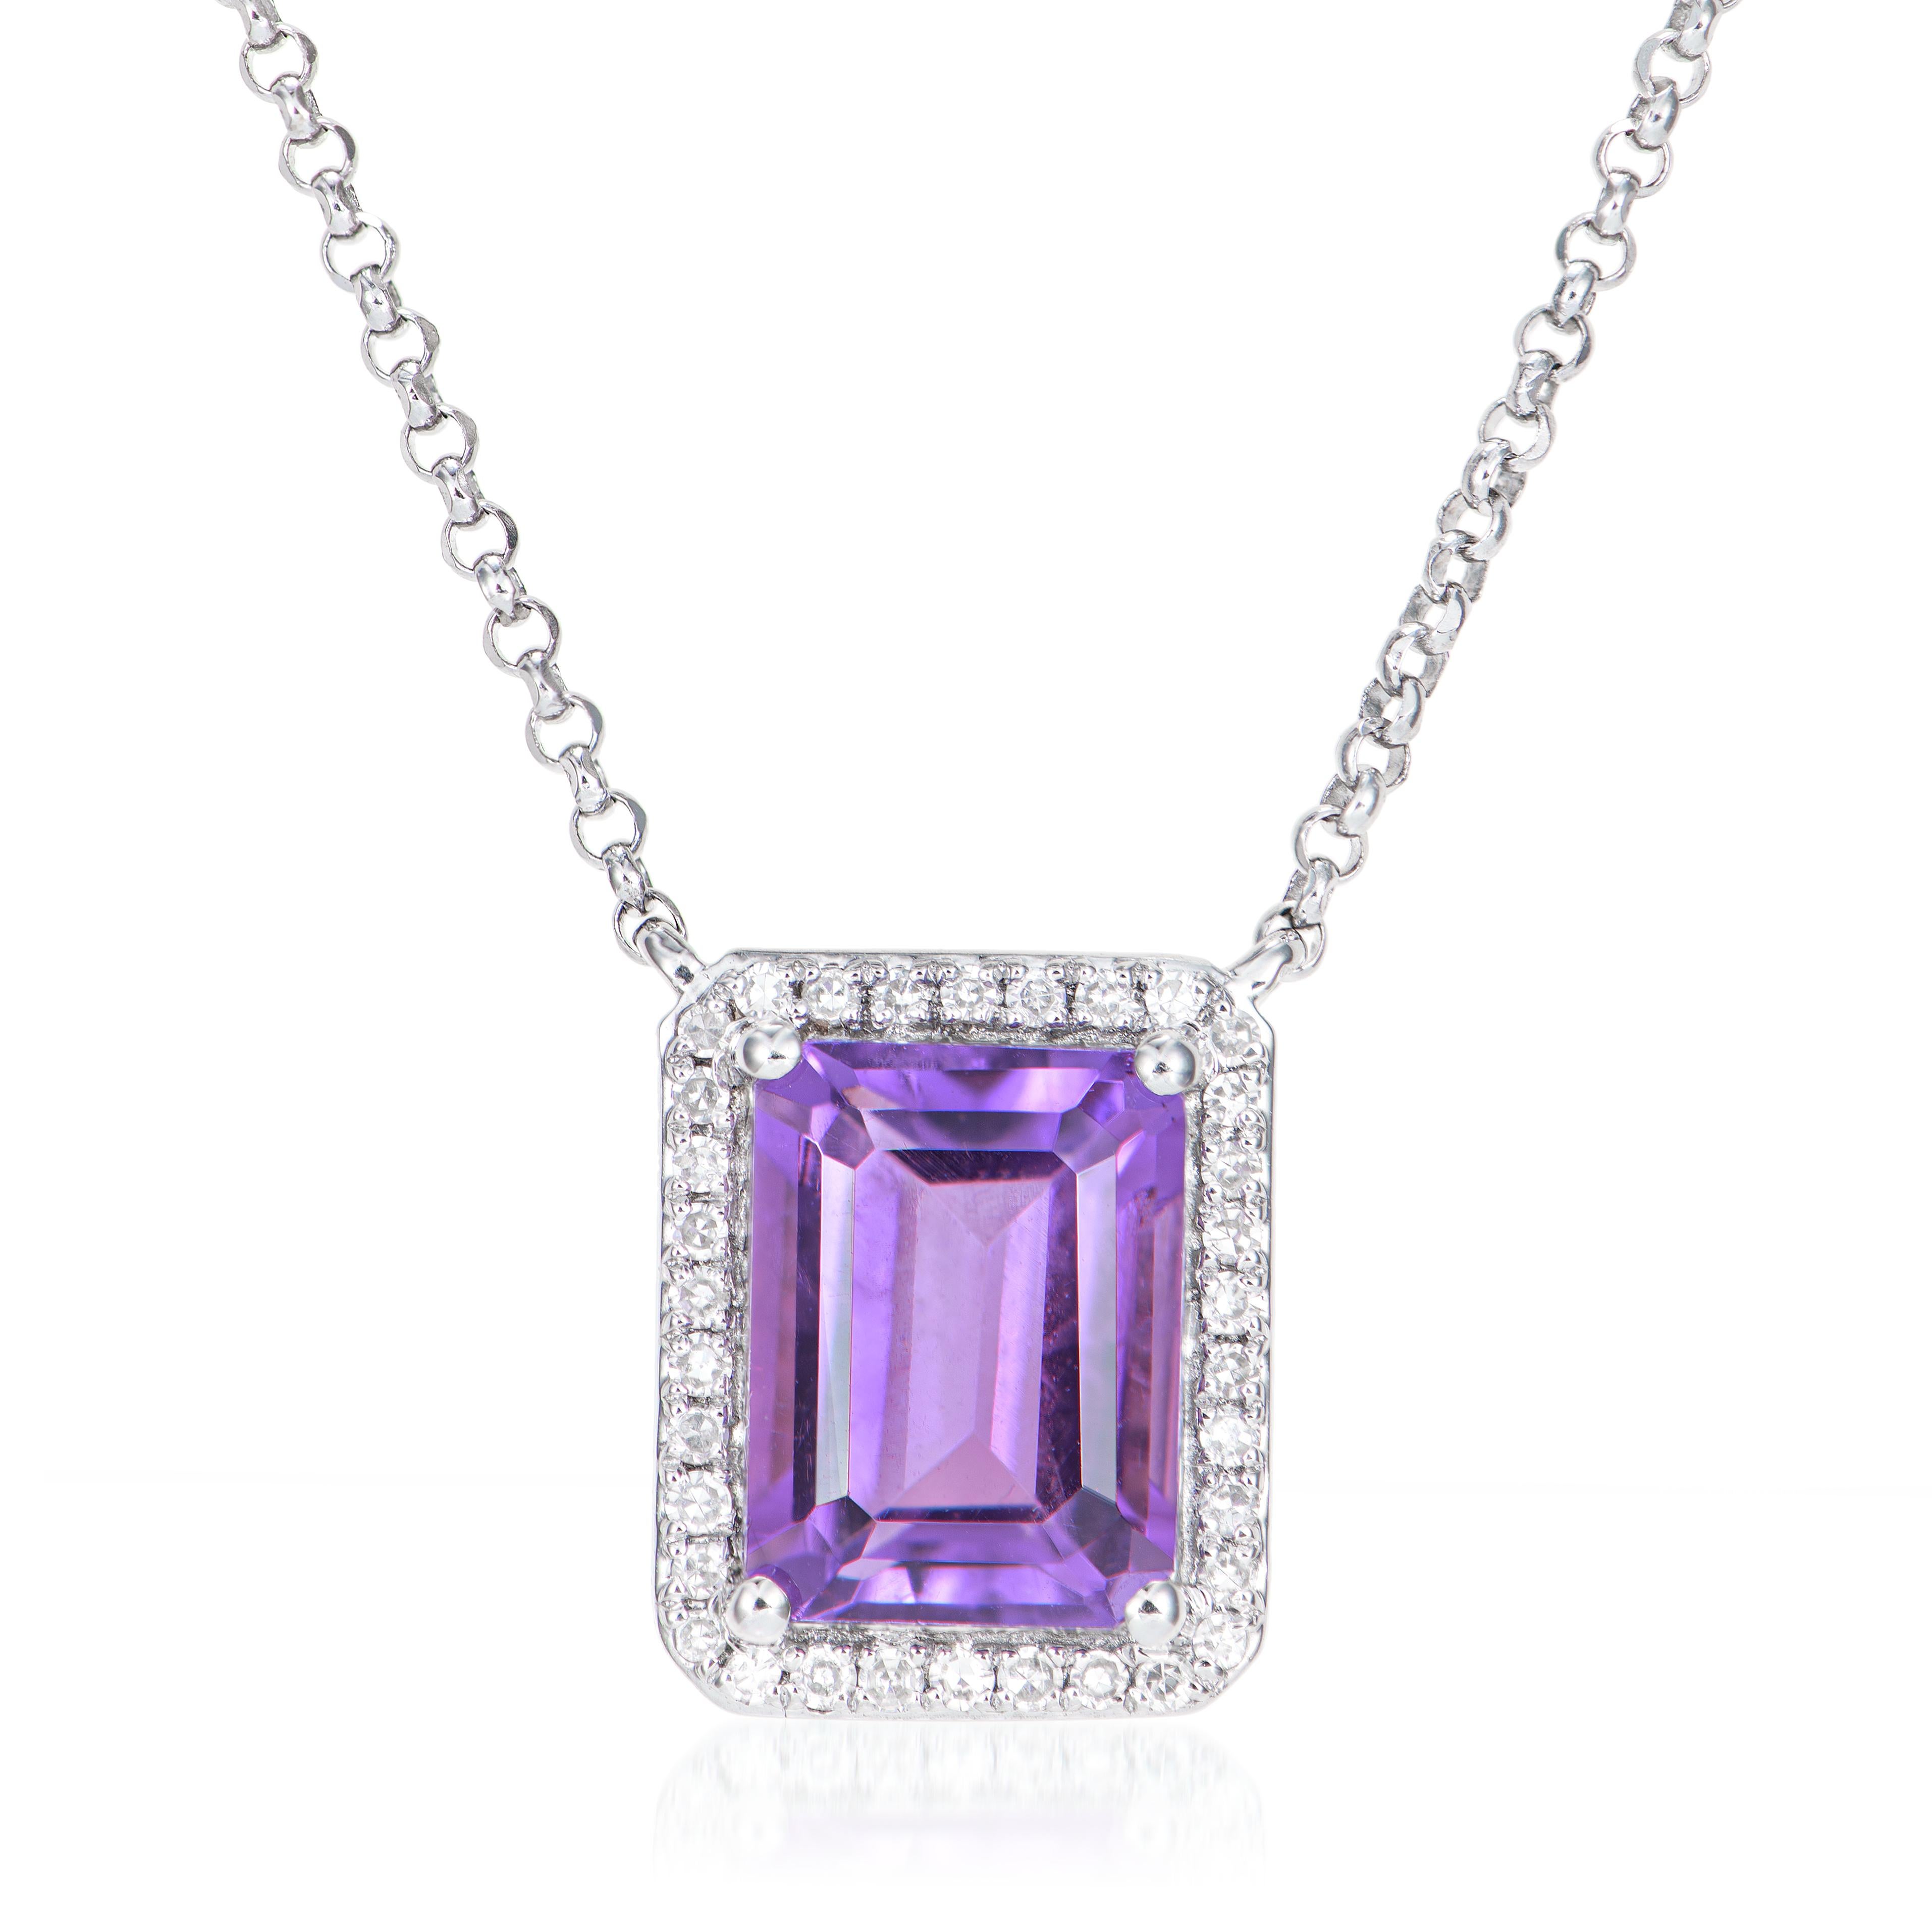 Presented A lovely set of Amethyst for people who value quality and want to wear it to any occasion or celebration. The White gold Amethyst Pendant adorned with diamonds offer a classic yet elegant appearance.

Amethyst Pendant in 18Karat White Gold